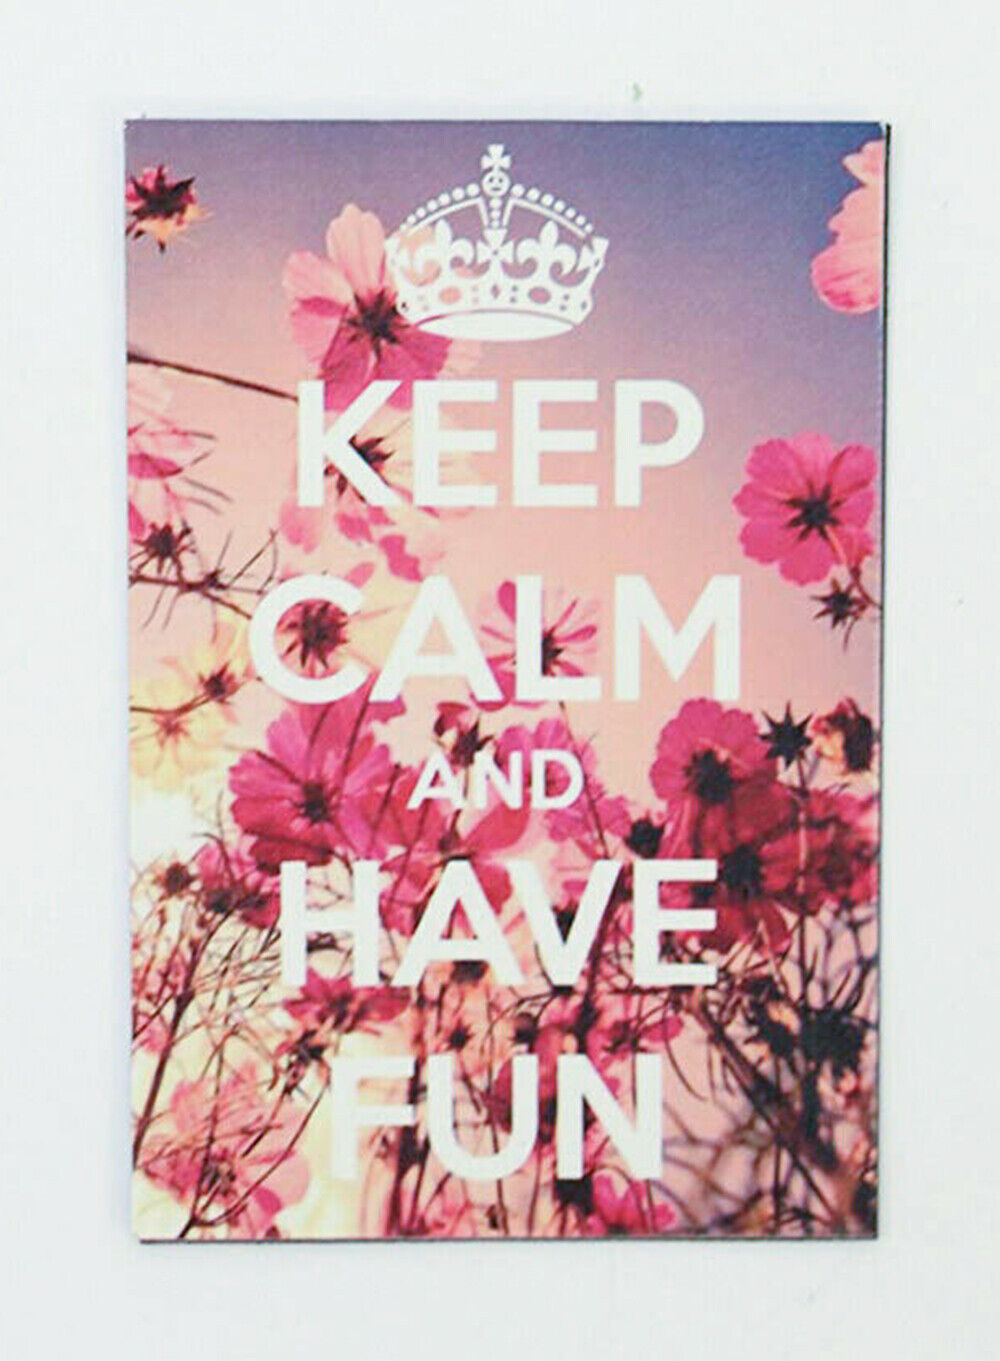 KEEP CALM HAVE FUN pic Design Vintage Poster Magnet Fridge Collectibles Home